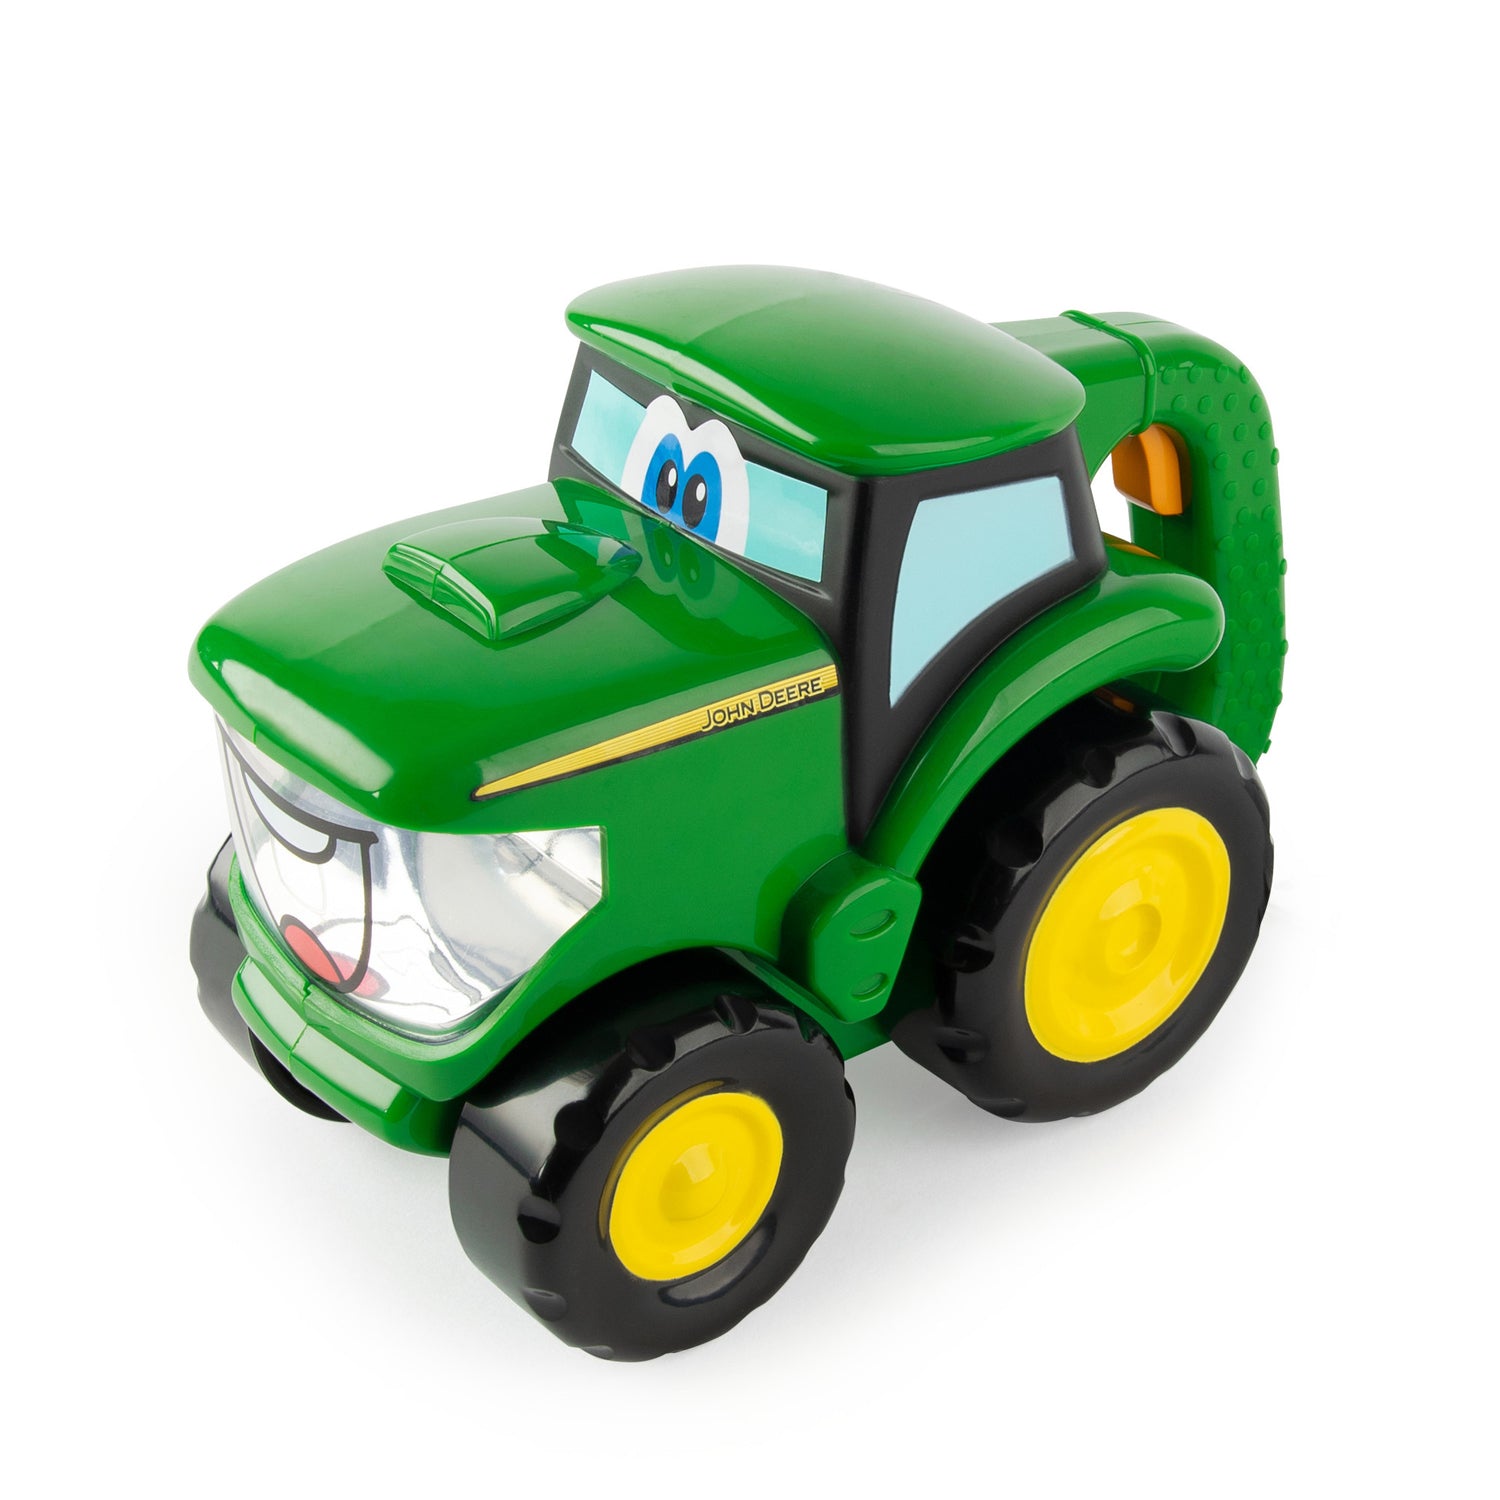 John Deere Build-a-Johnny Tractor Toy - Kids 18 Mo Up - Toy Drill - Brand  New!